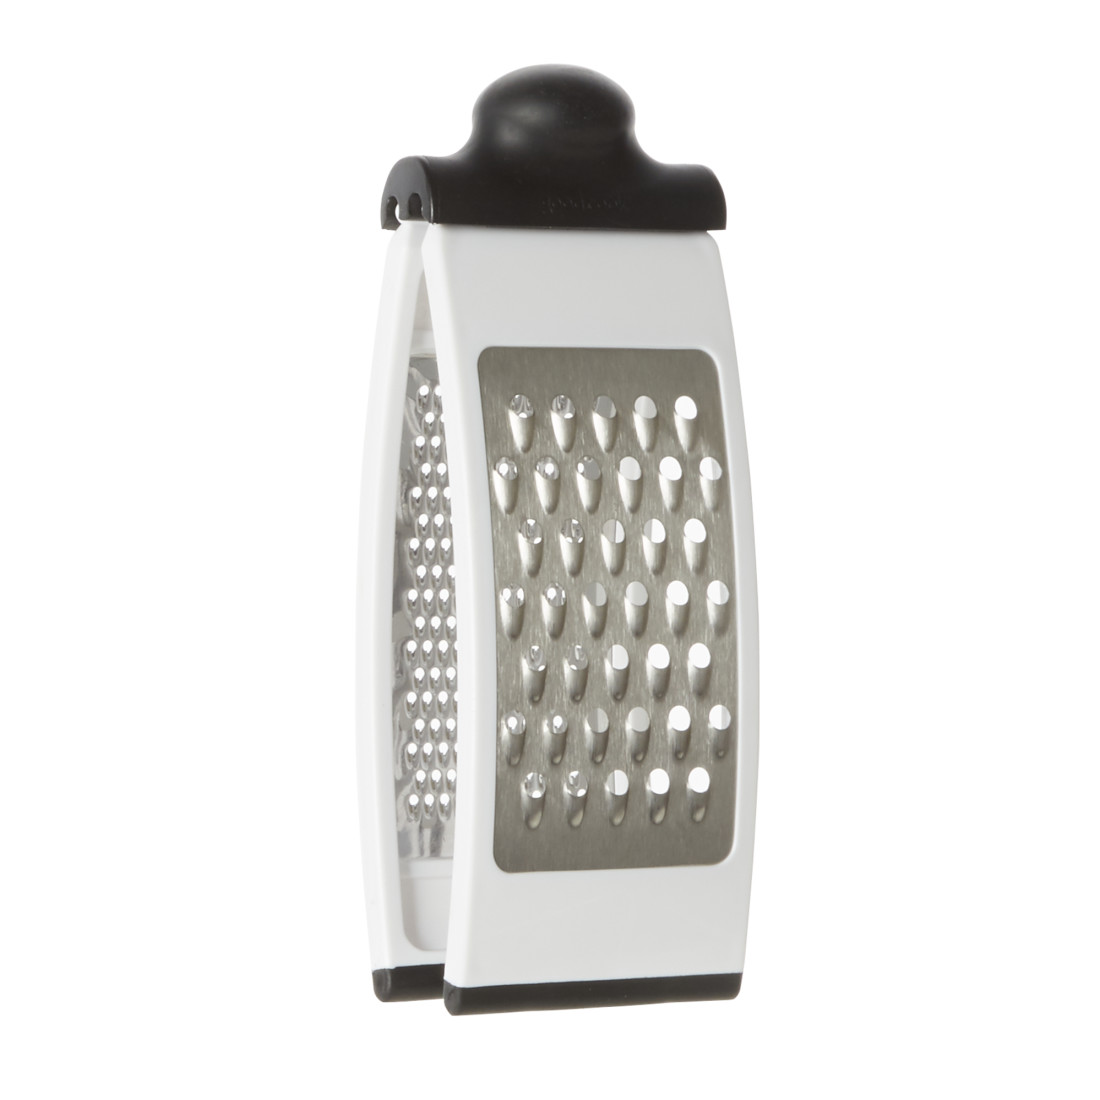 Good Grips Etched 2-Fold Hand Double Grater - Cook on Bay